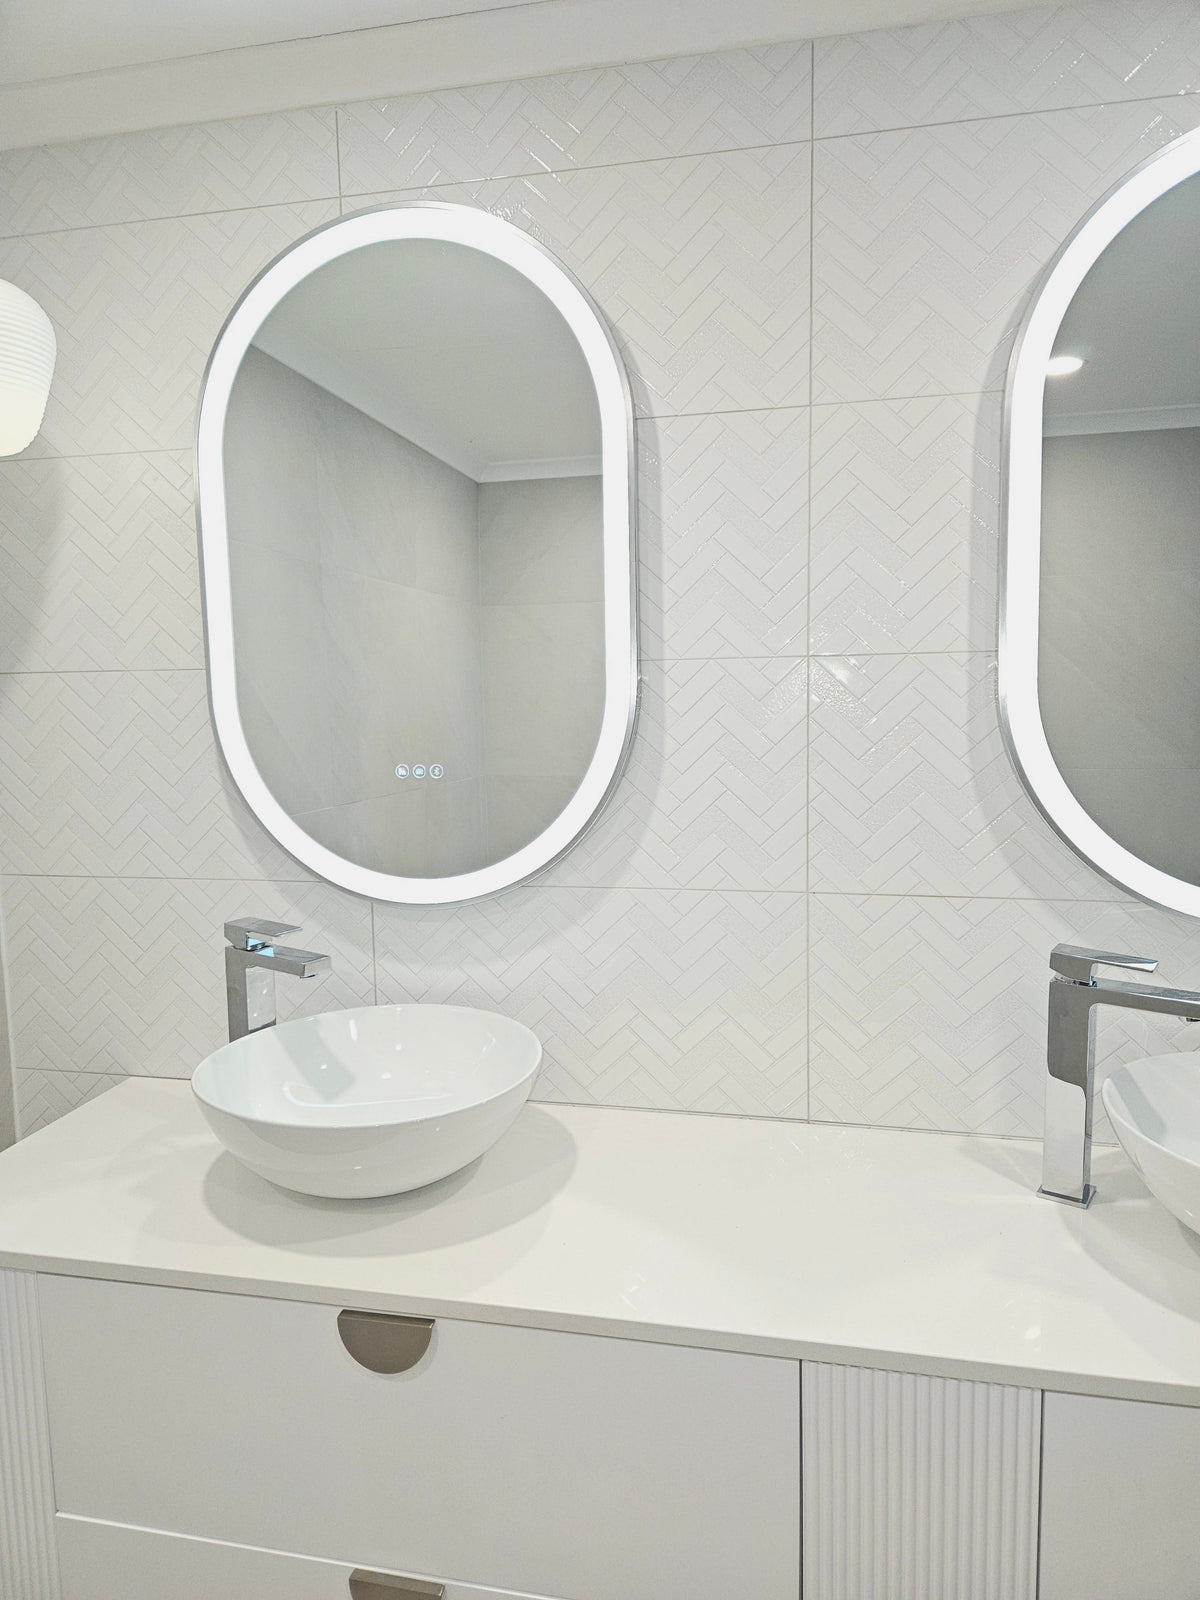 Pair of chic pill-shaped Silver Frame Smart LED Mirrors in contemporary white bathroom